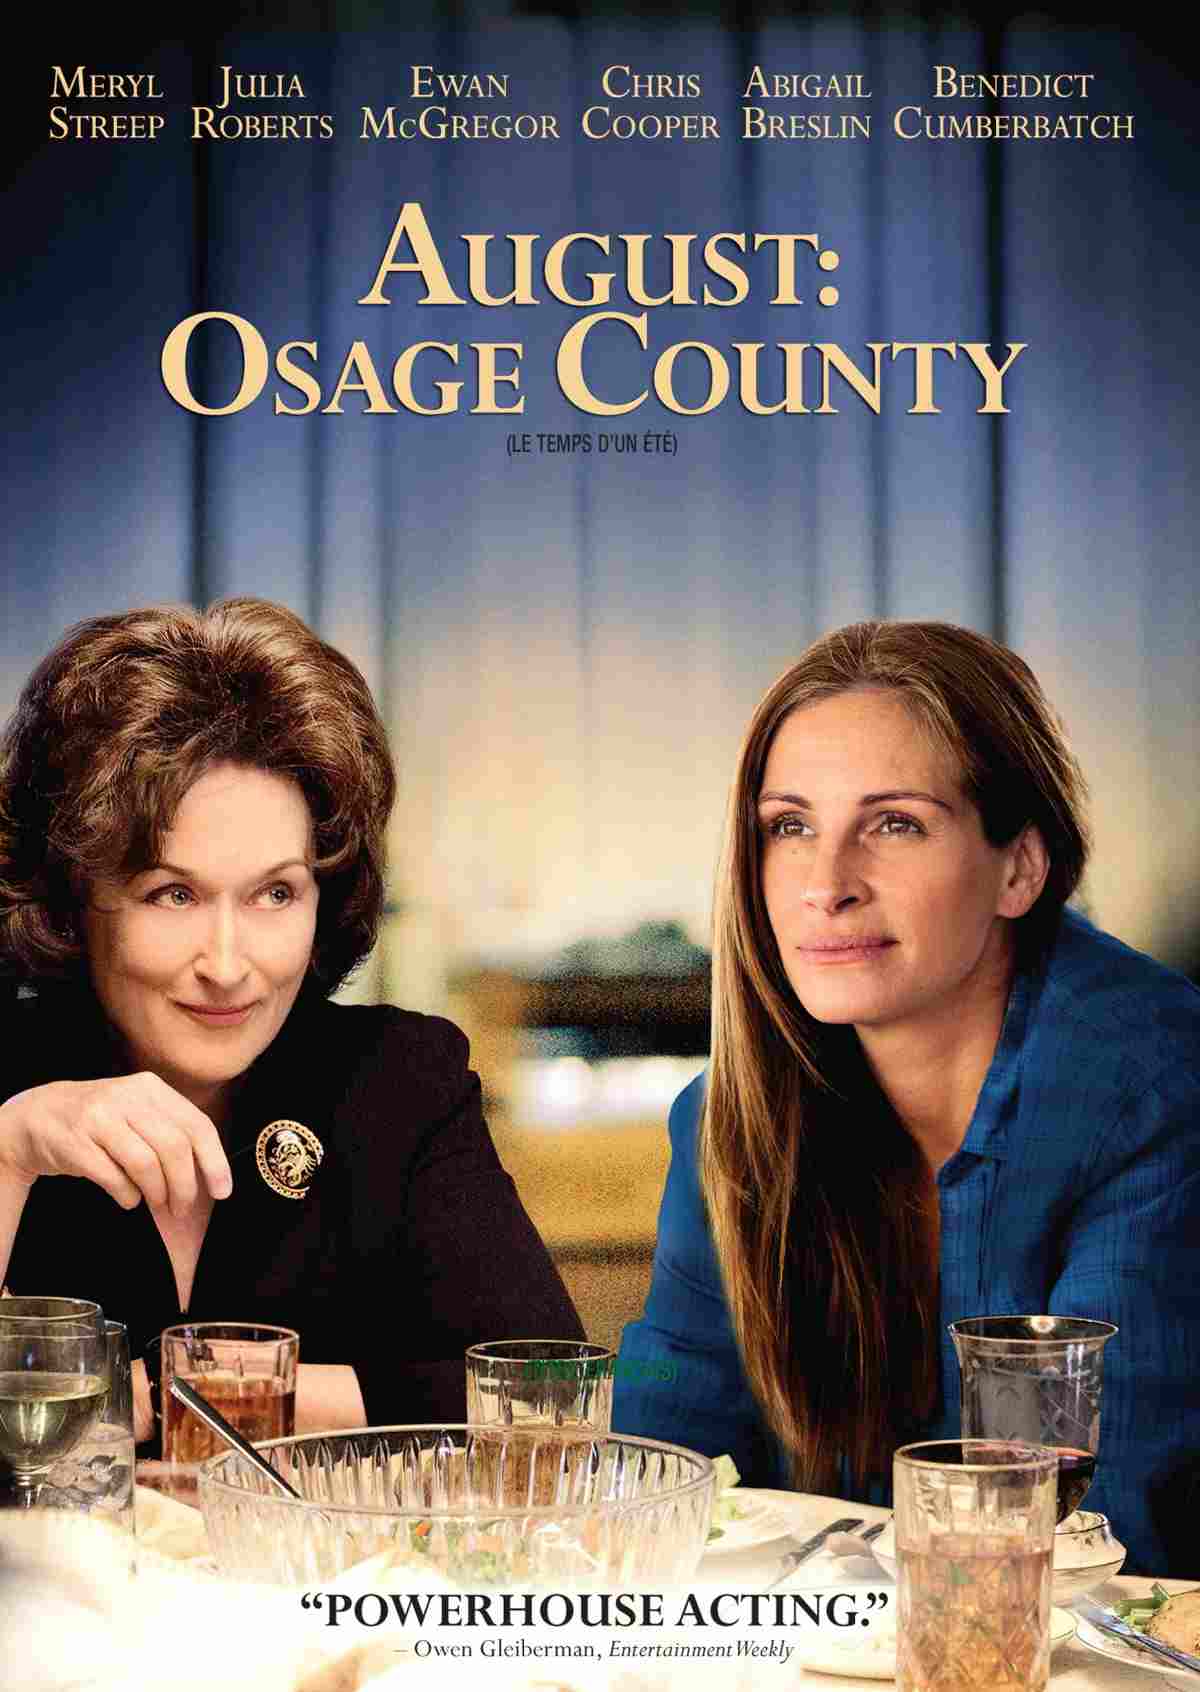 August: Osage County Film Study